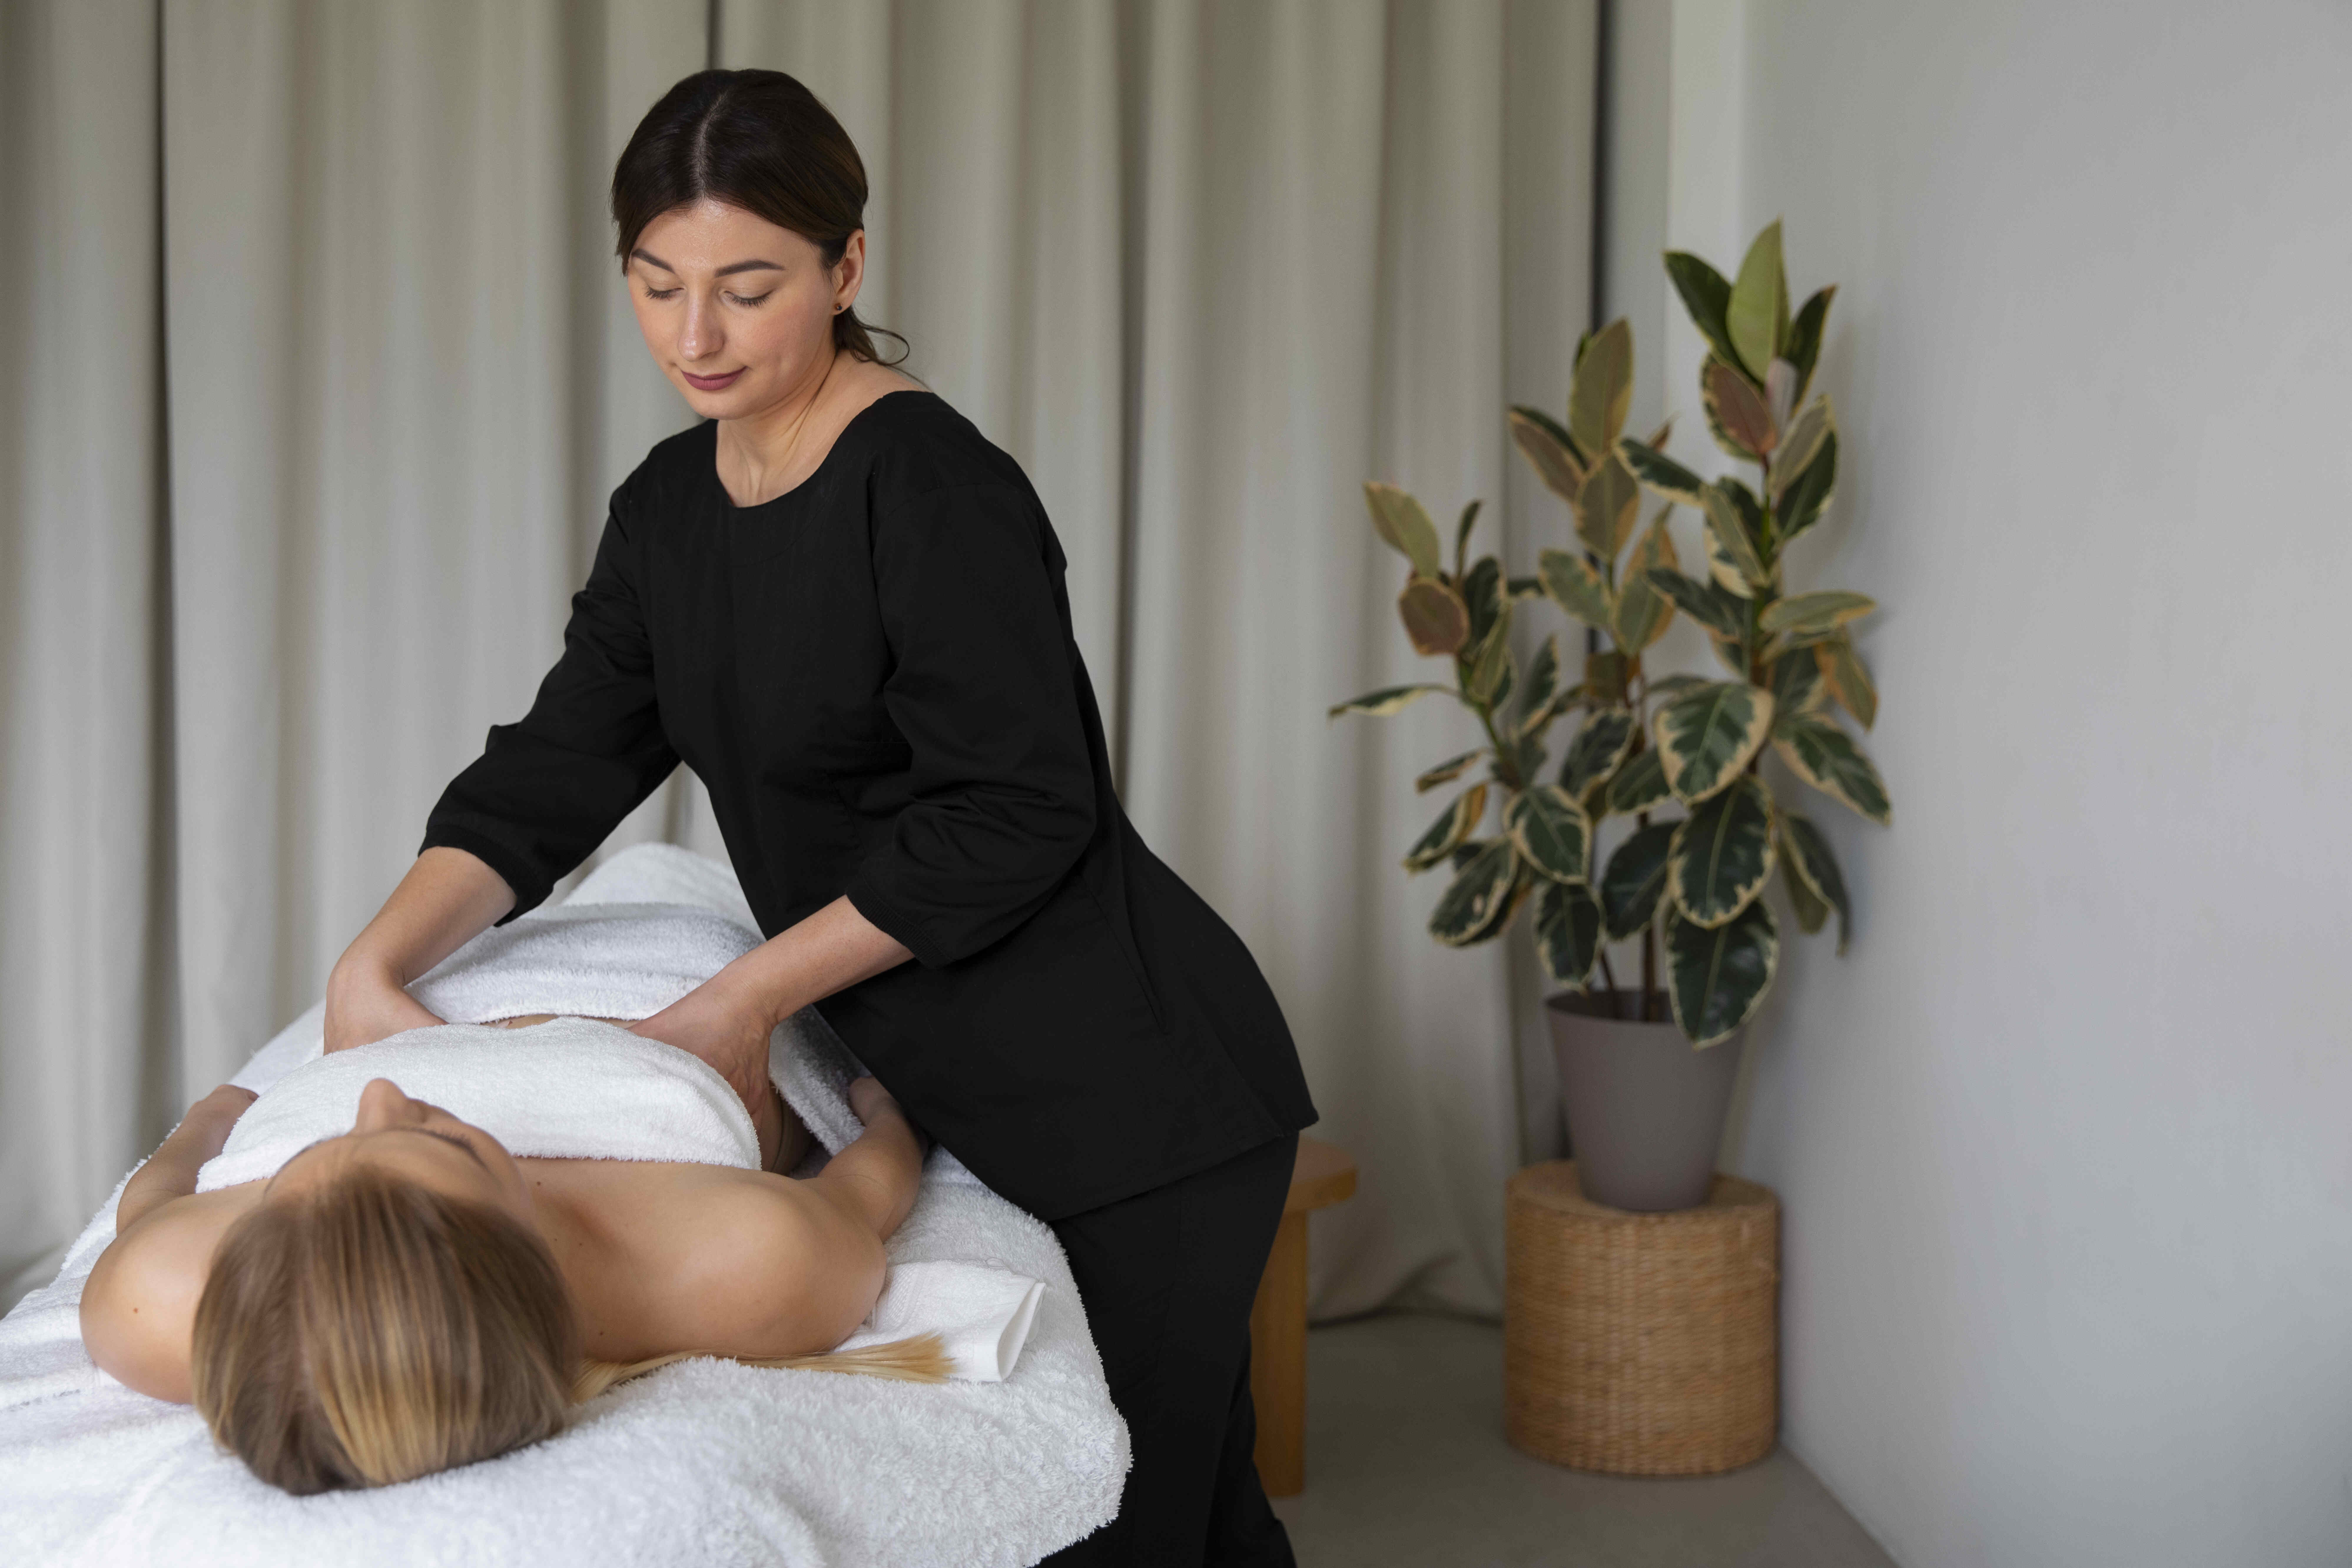 York Mills Spa Introduces Exclusive Massage Therapy Services Tailored for Toronto Residents | TechPlanet